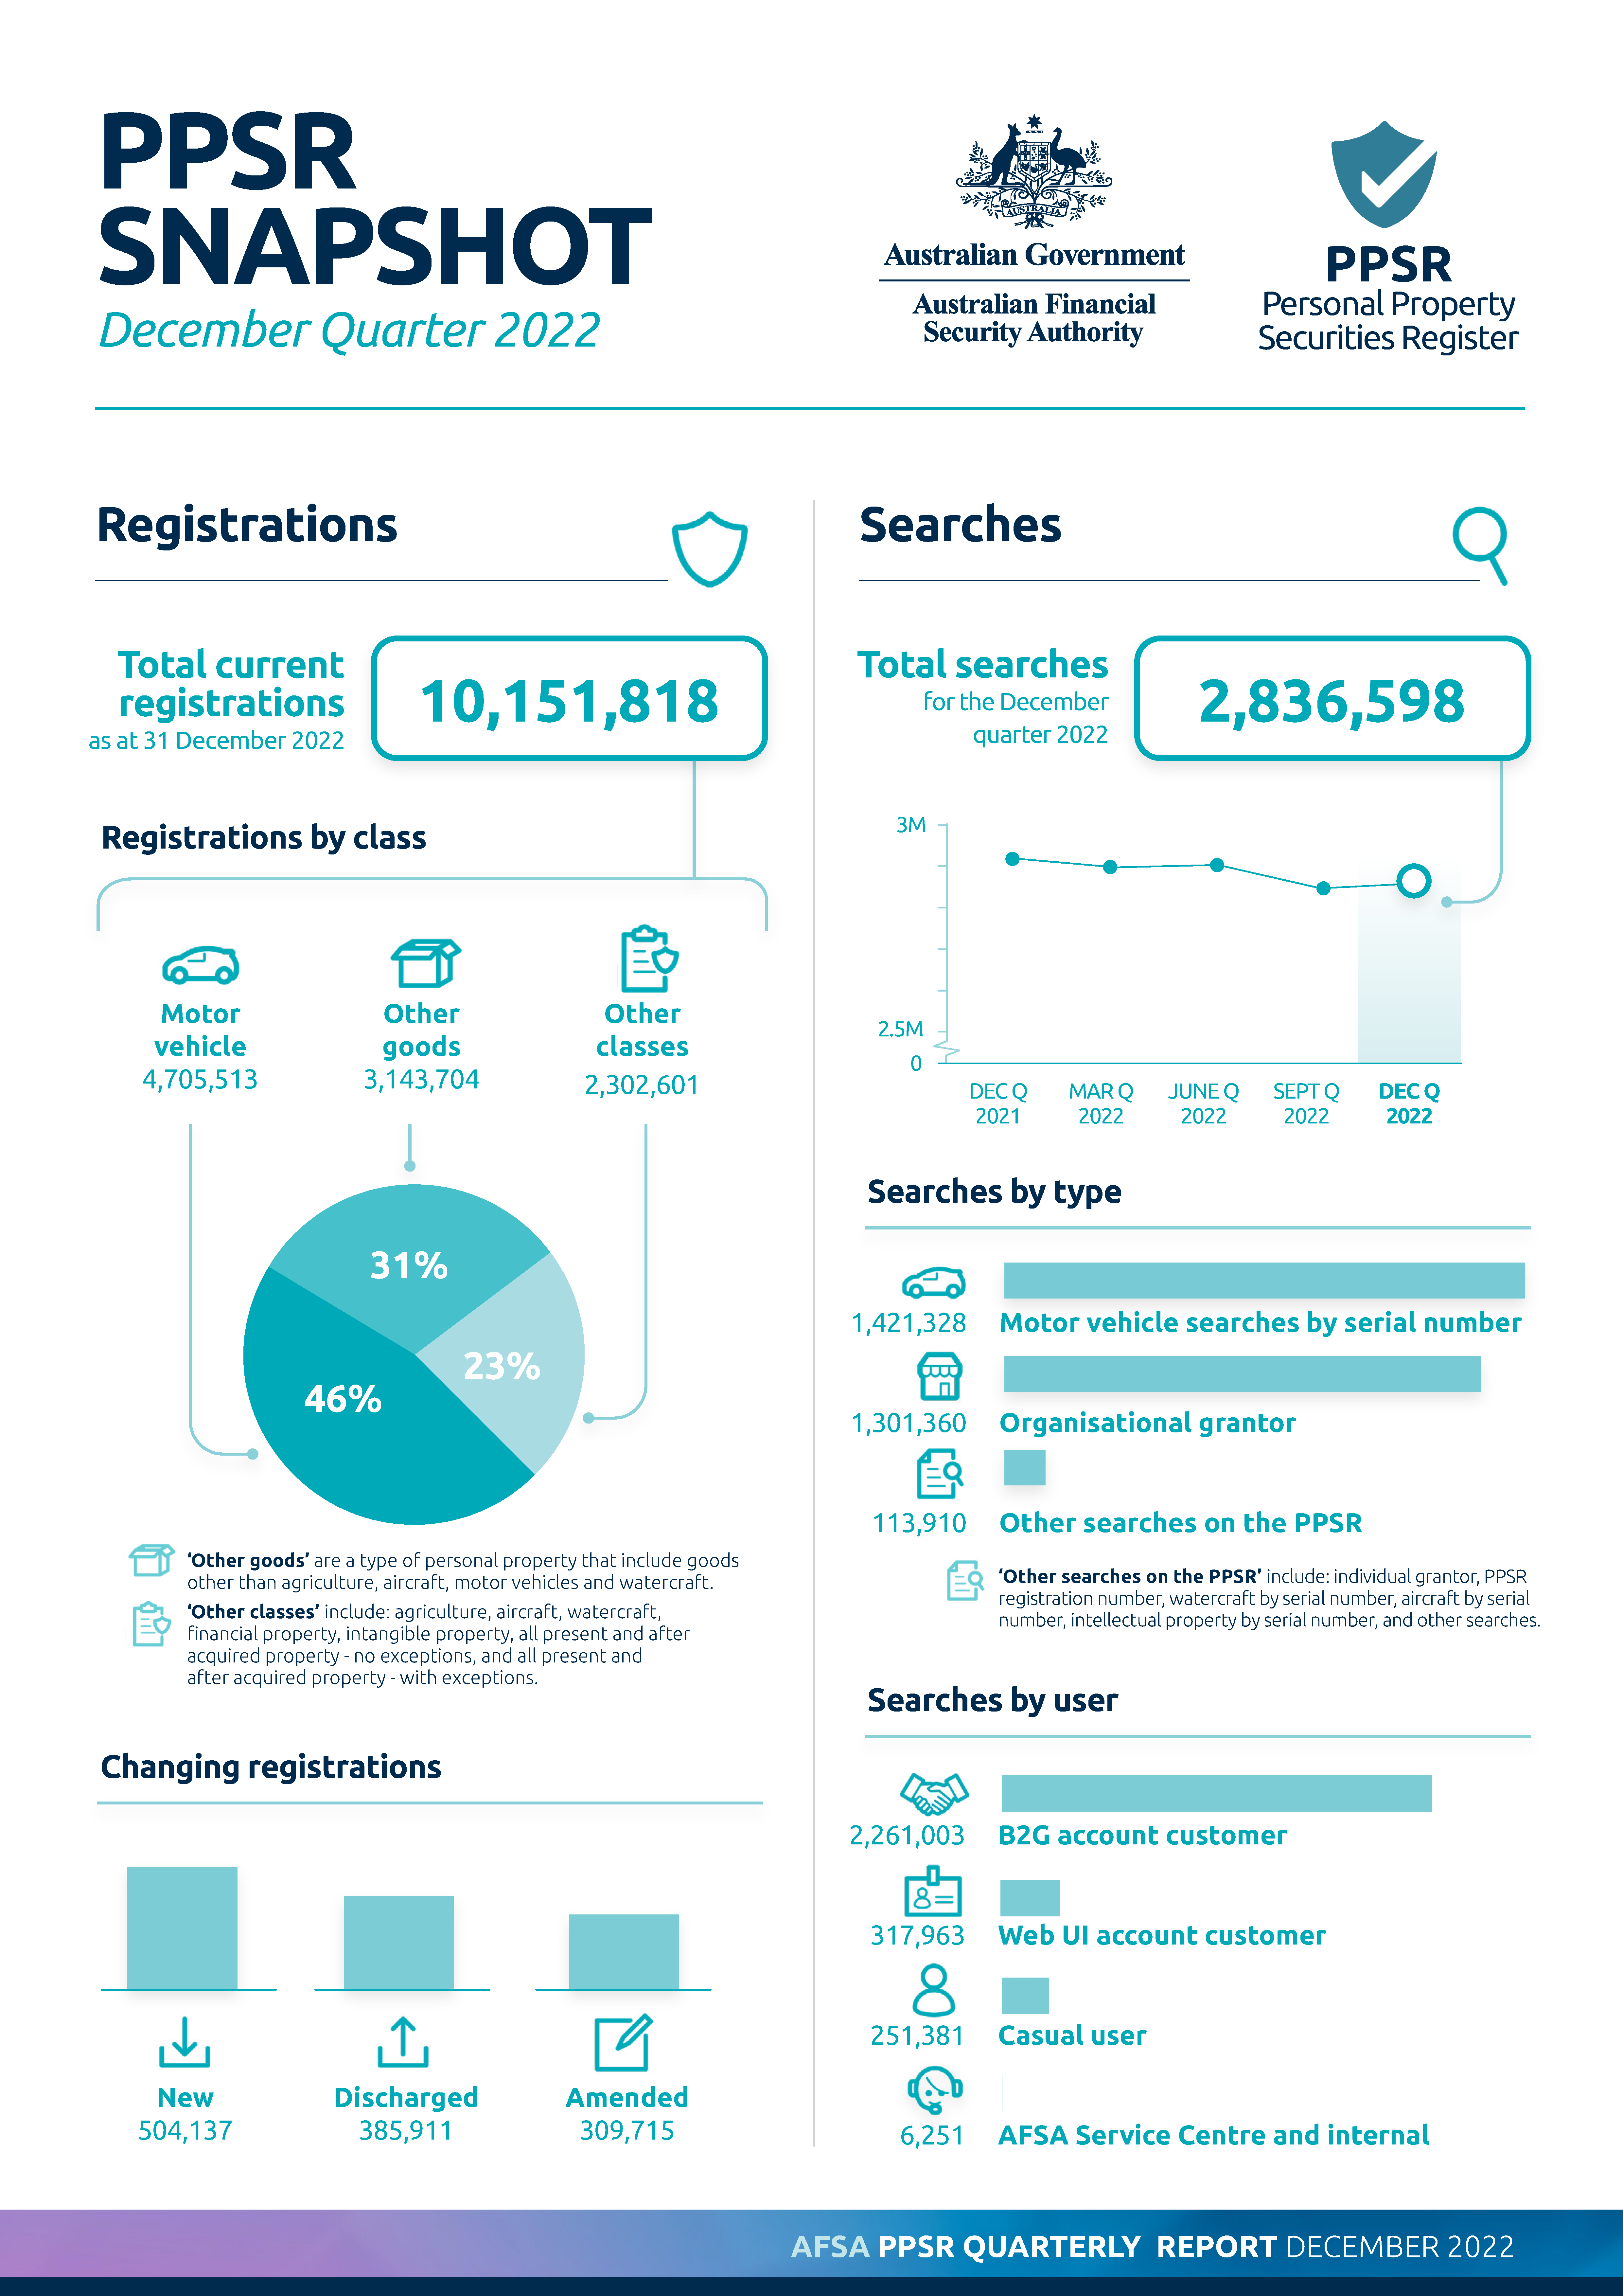 Snapshot of the PPSR (Personal Property Securities Register) activities during the December Quarter of 2022. The image encompasses both registration and search details. A concise overview of the data can be found in the attached media release. For an in-depth analysis, consult the available workbooks on the PPSR Quarterly Statistics page